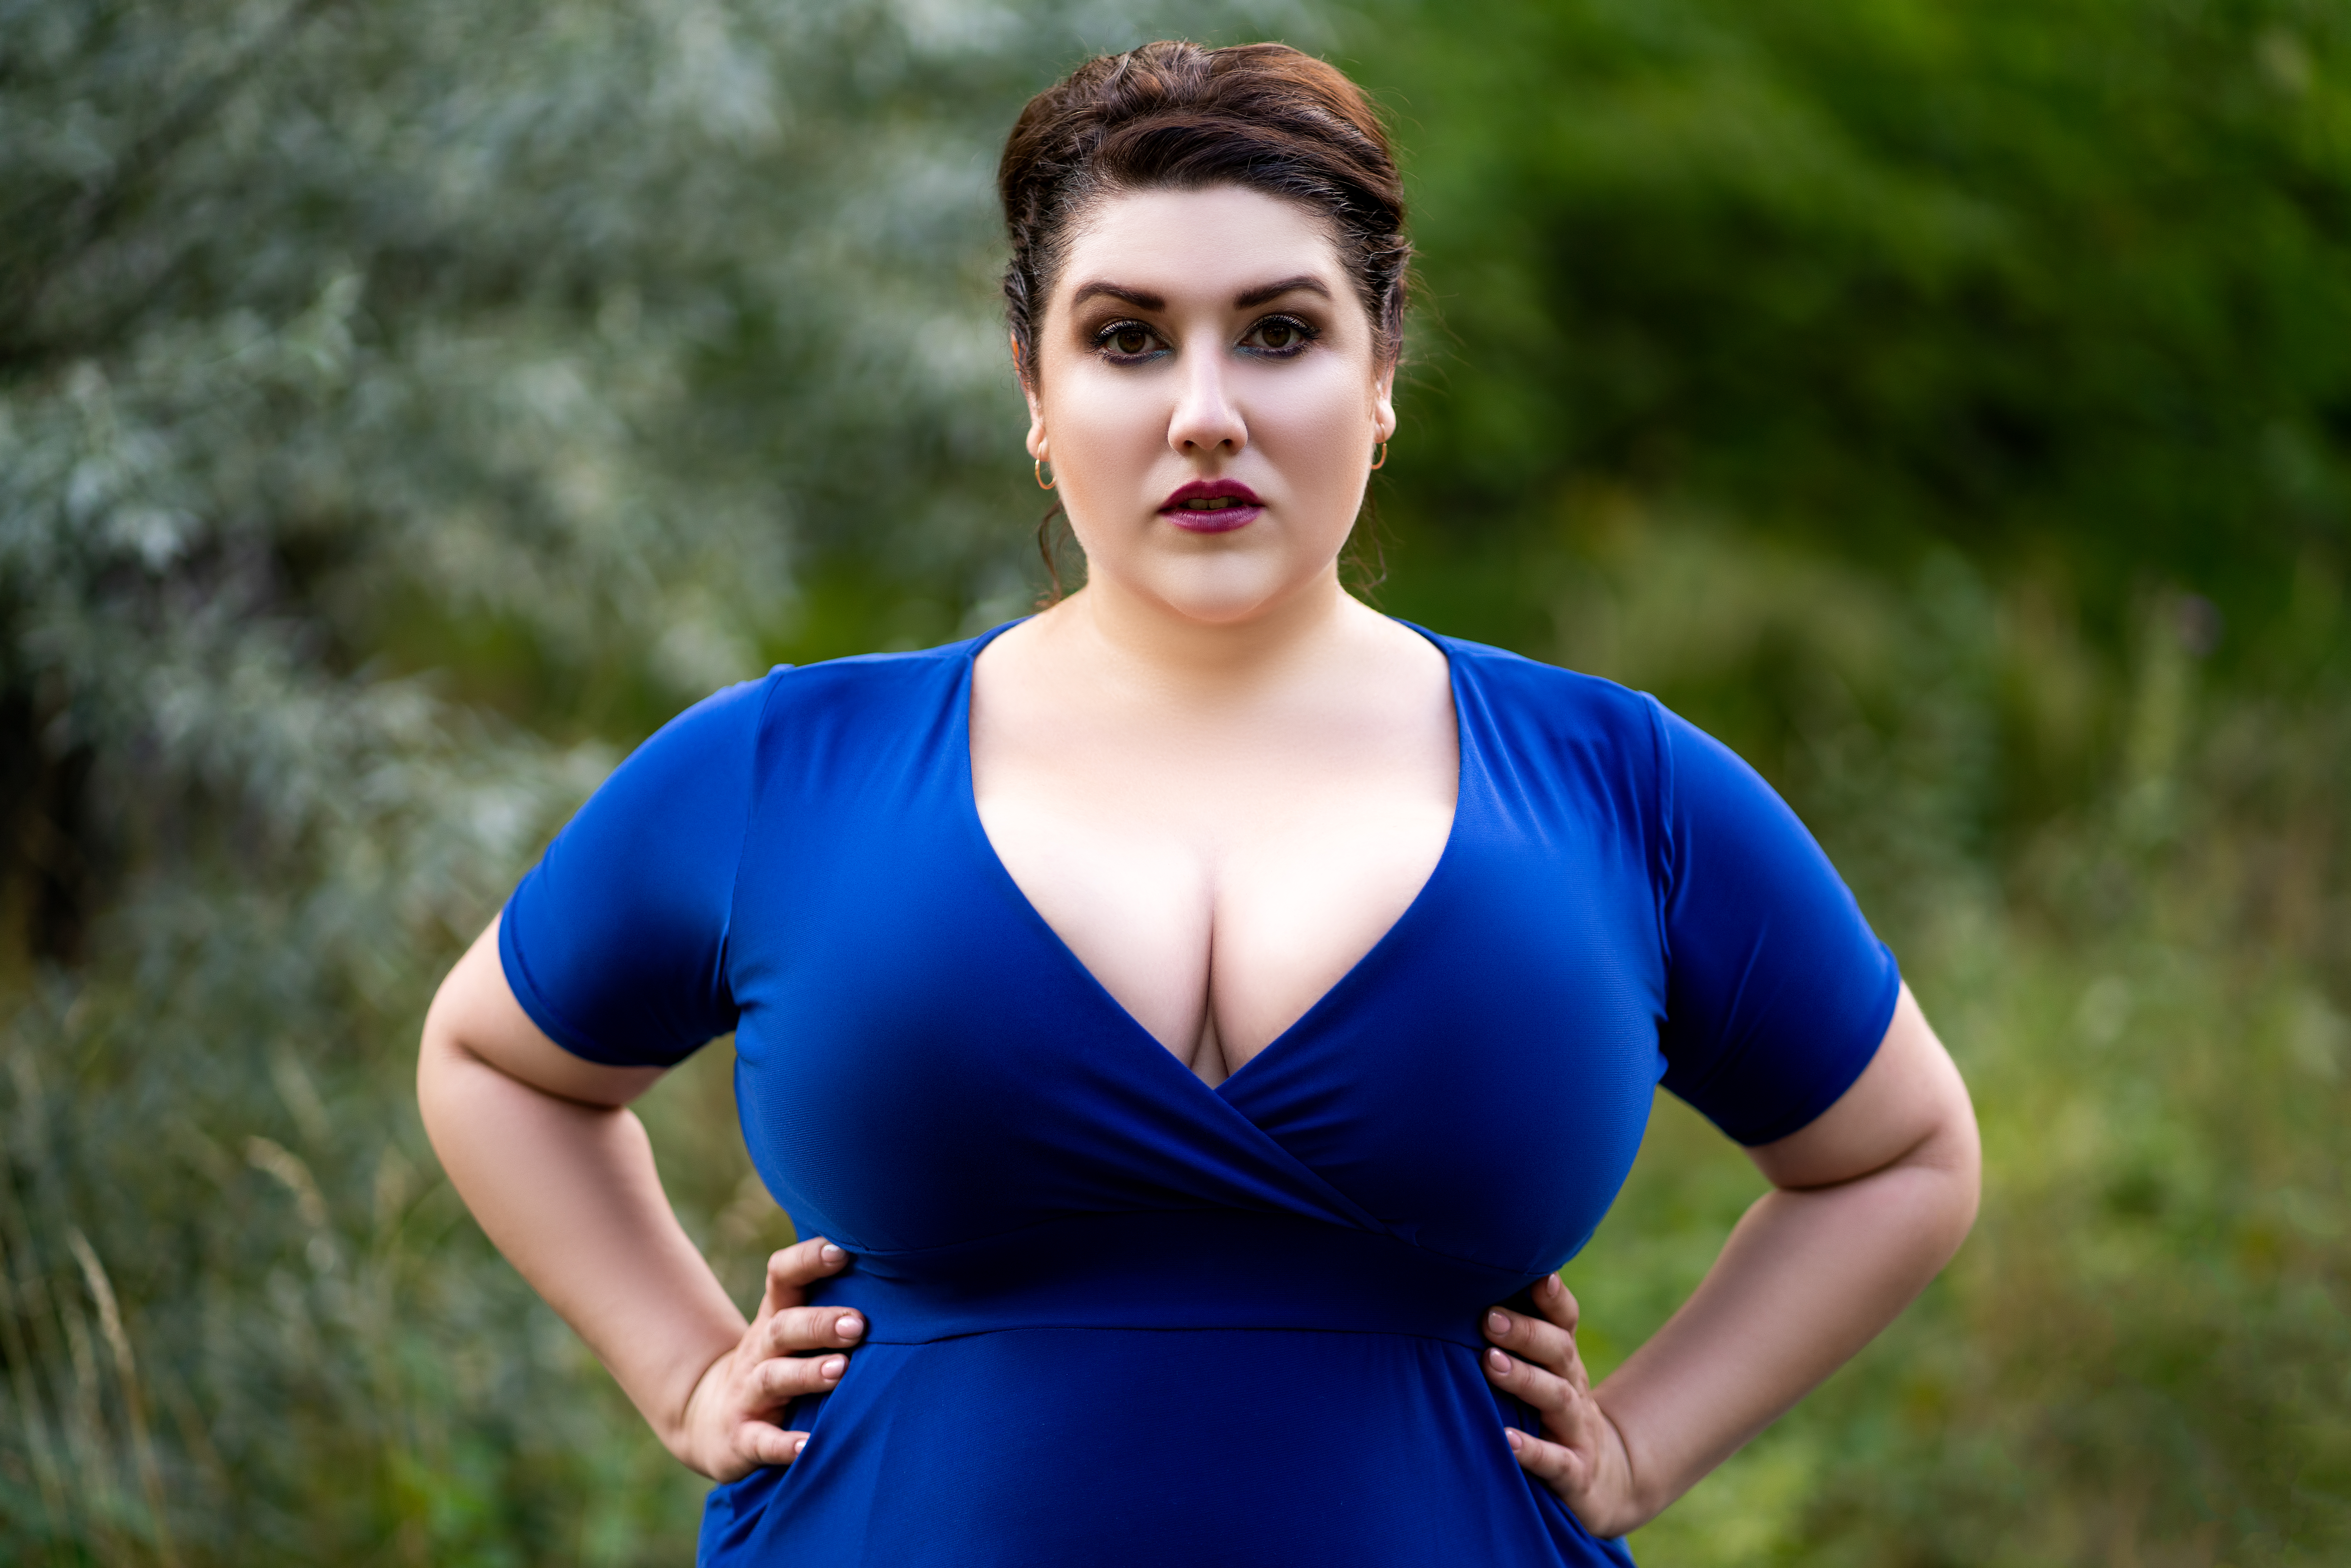 breast reduction candidate woman in a blue shirt with a brunette pixie cut